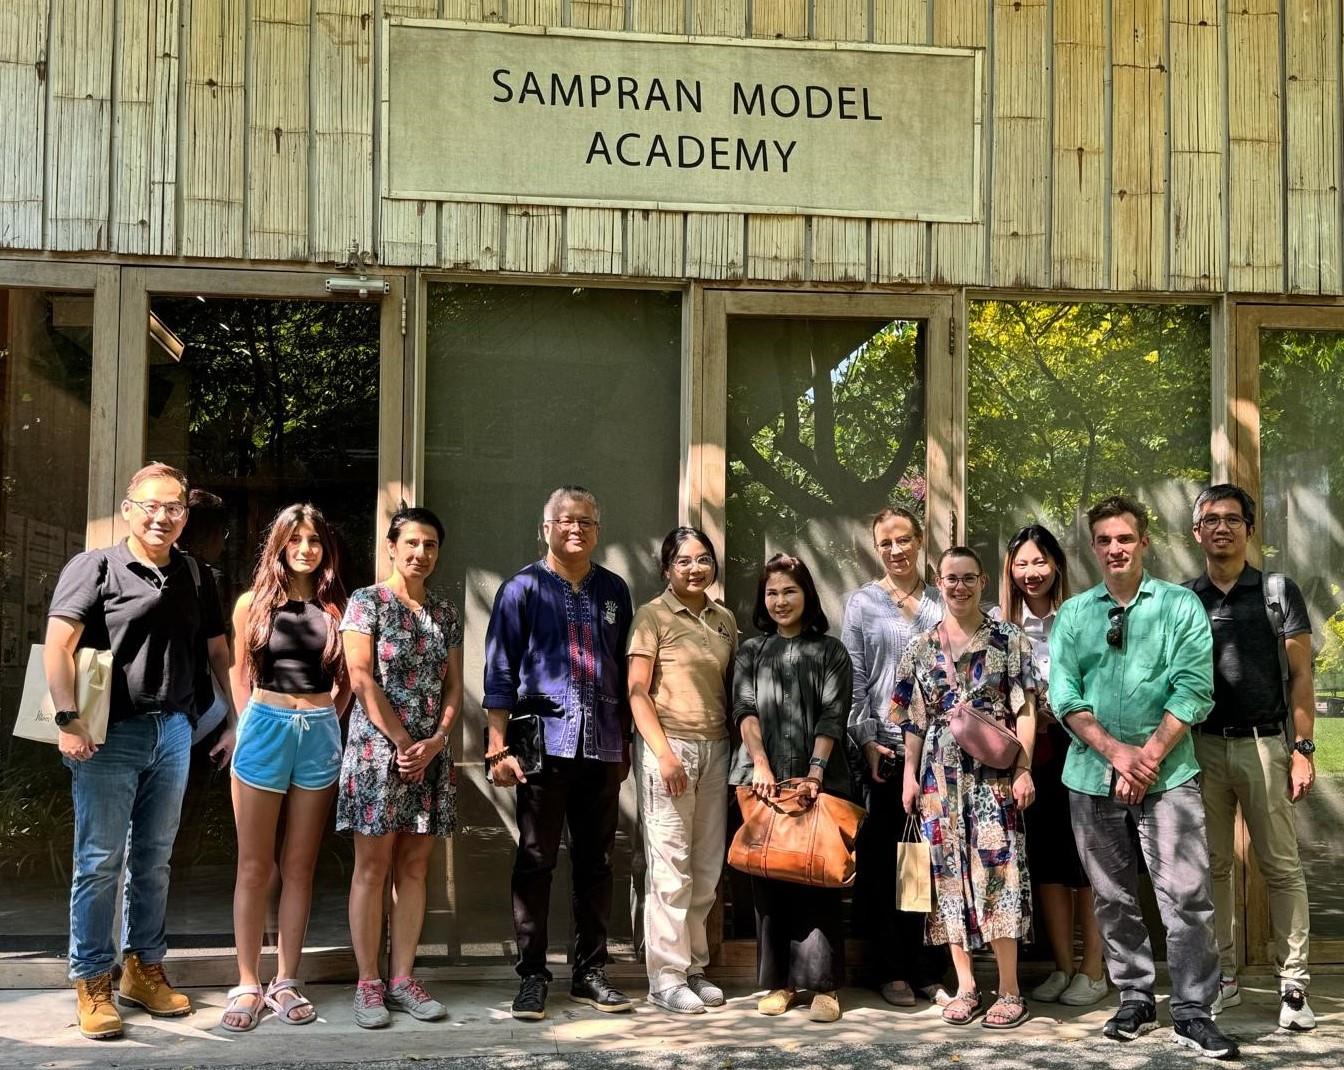 group of people standing in front of sampran Model academy